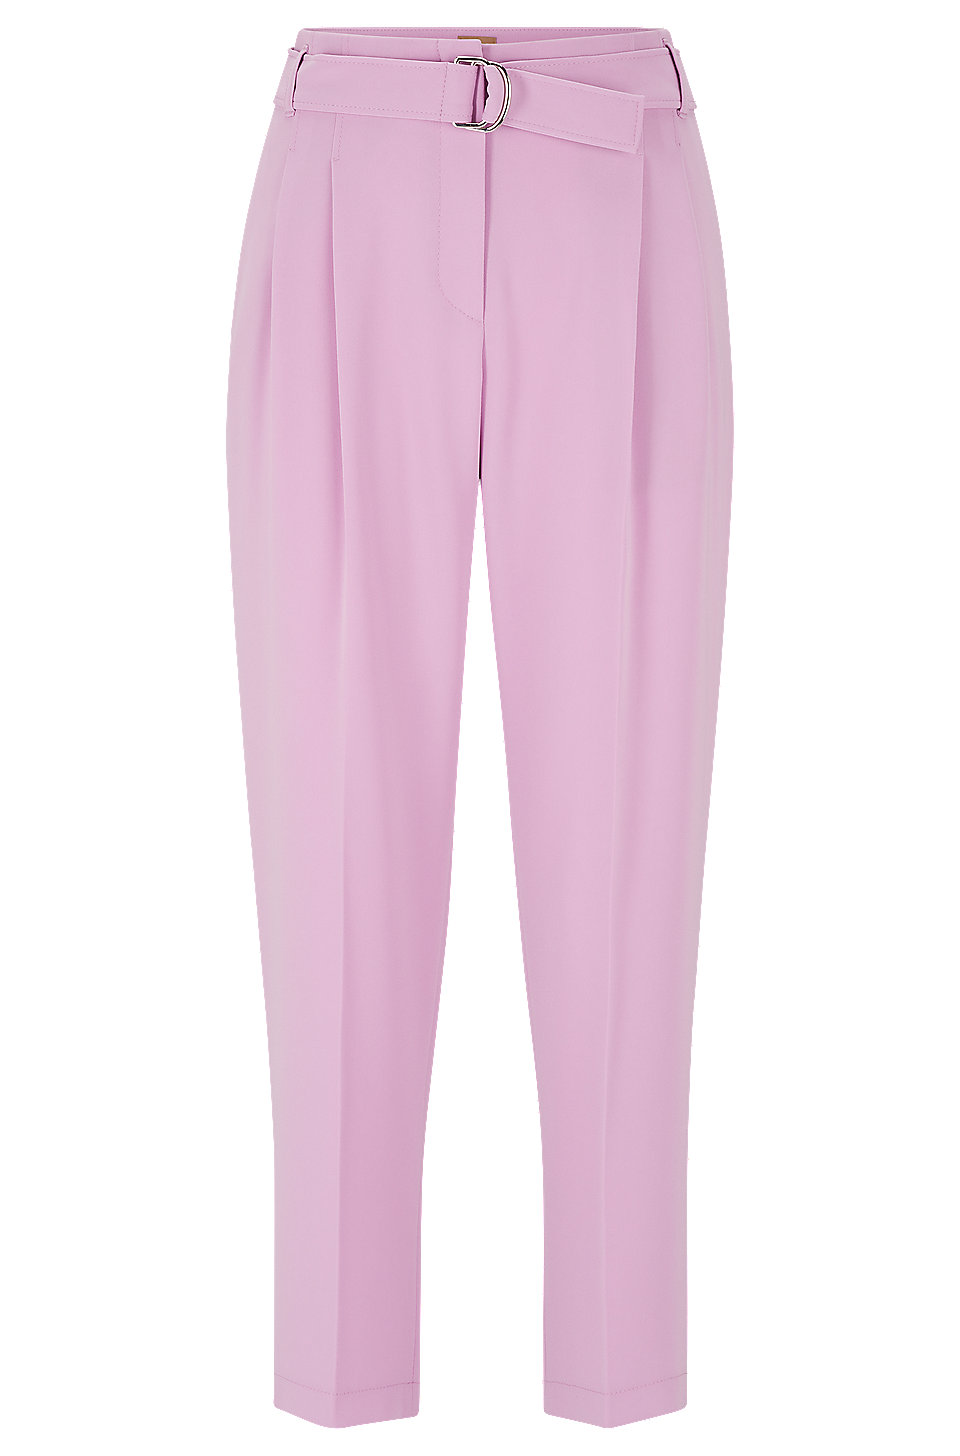 BOSS - Regular-fit crepe trousers with paper-bag waist